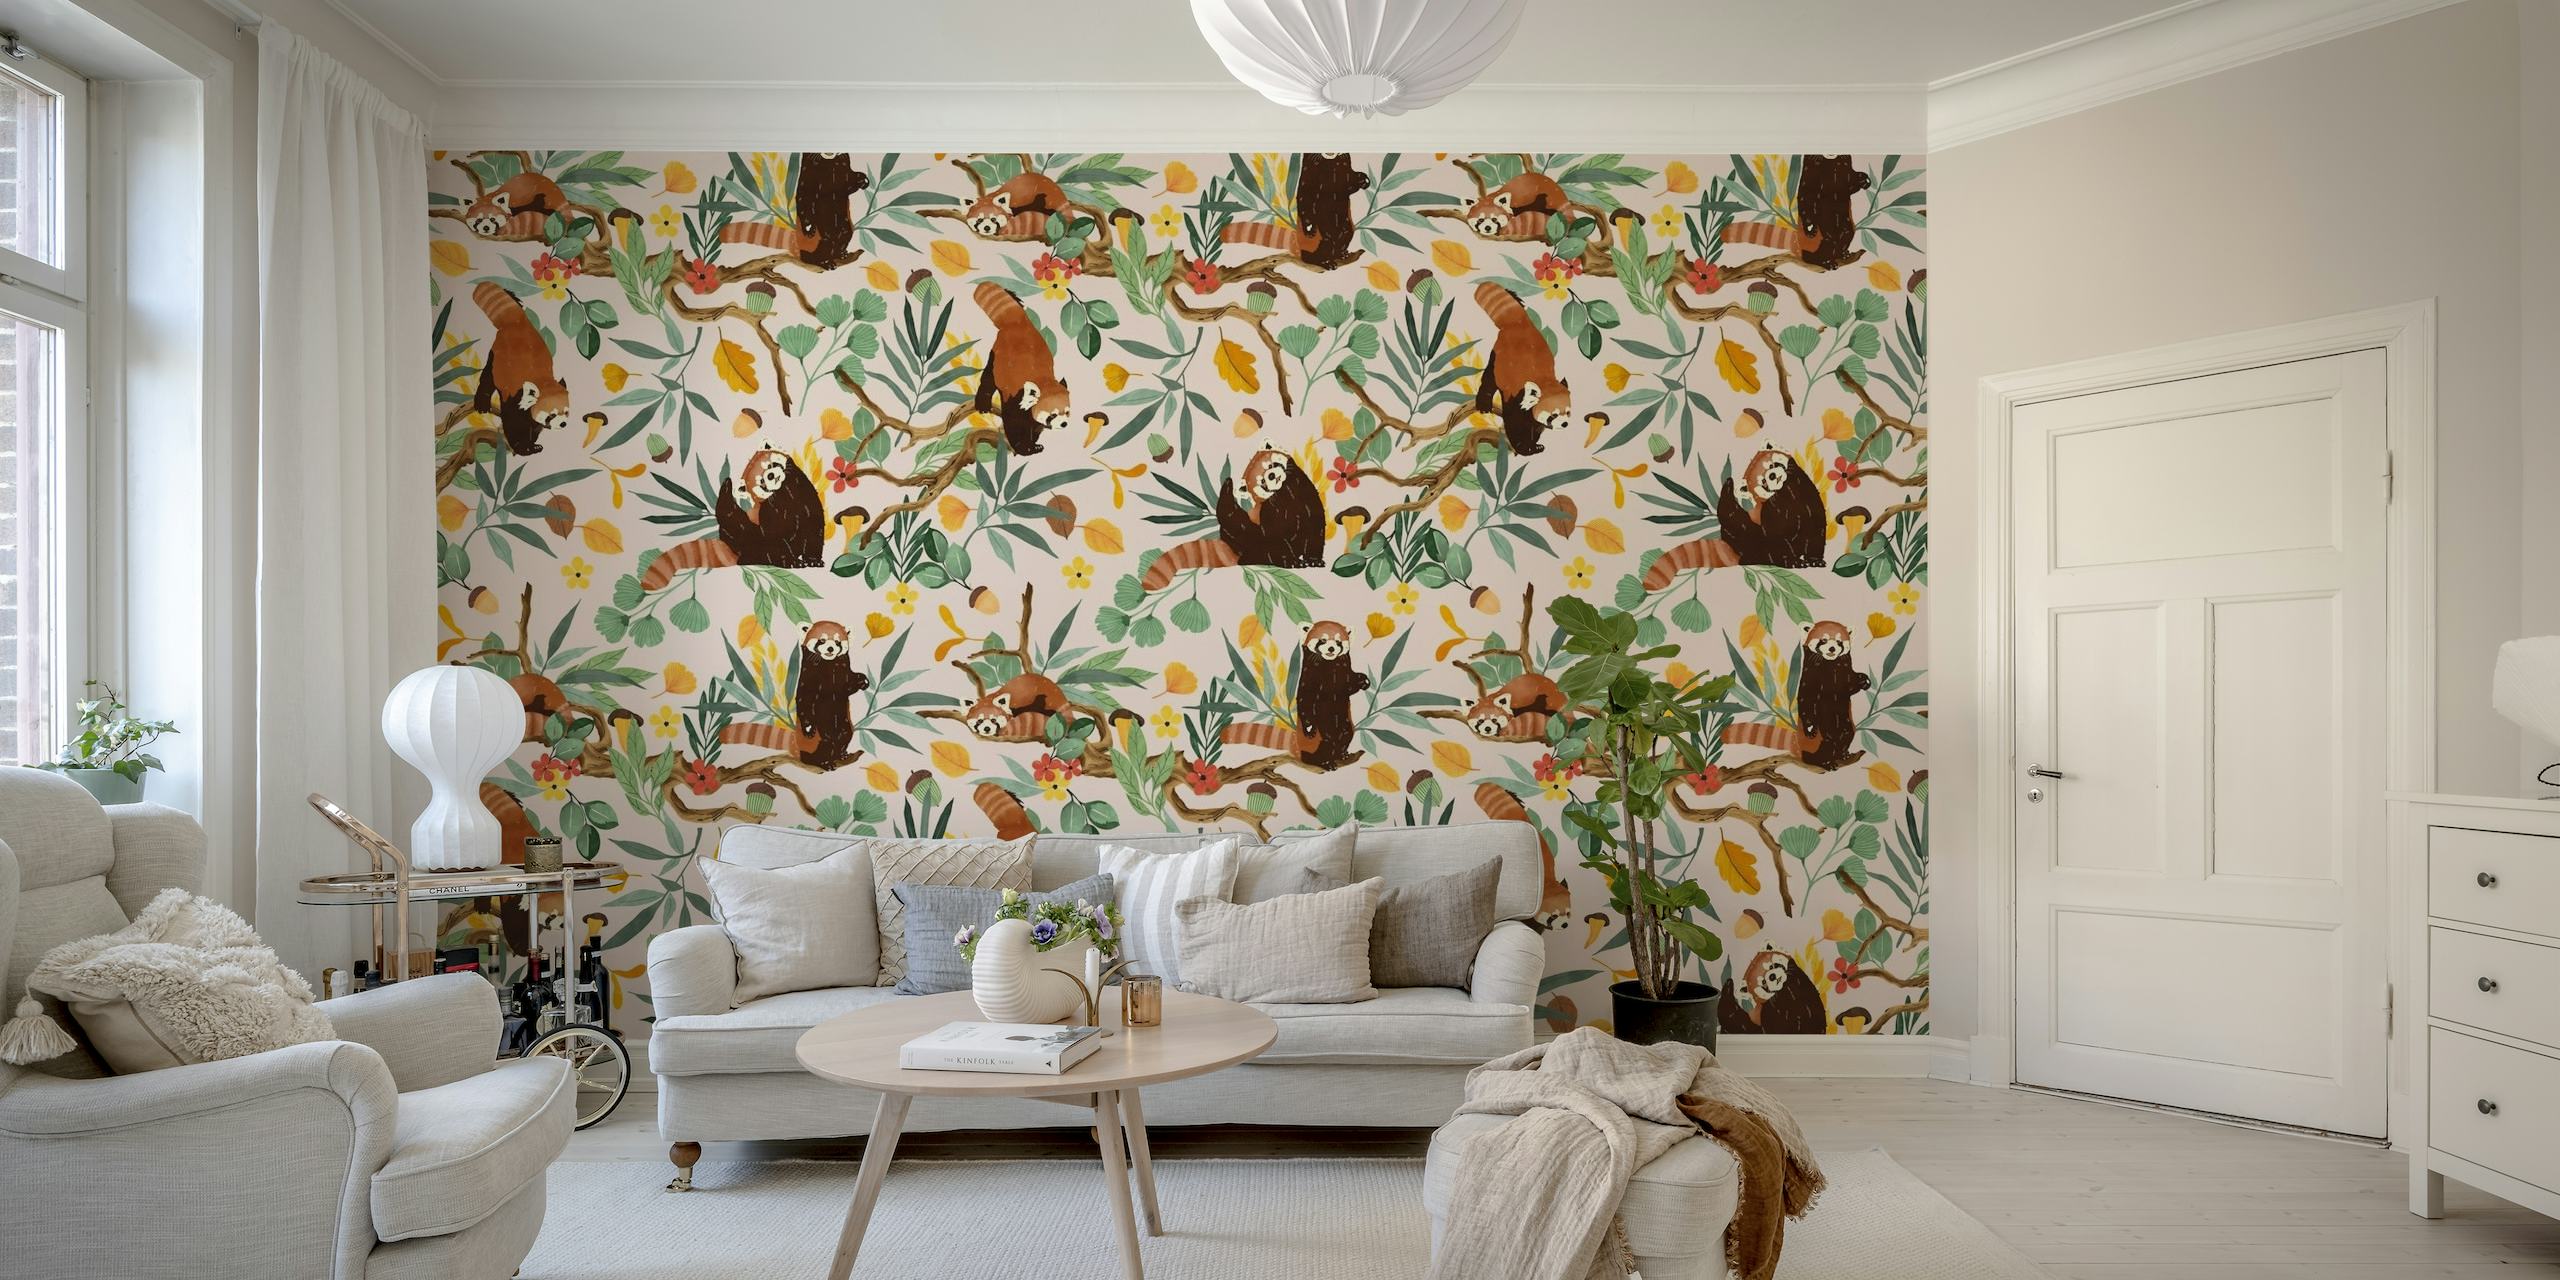 Wall mural of red pandas among tropical plants and flowers, offering a peaceful natural scene